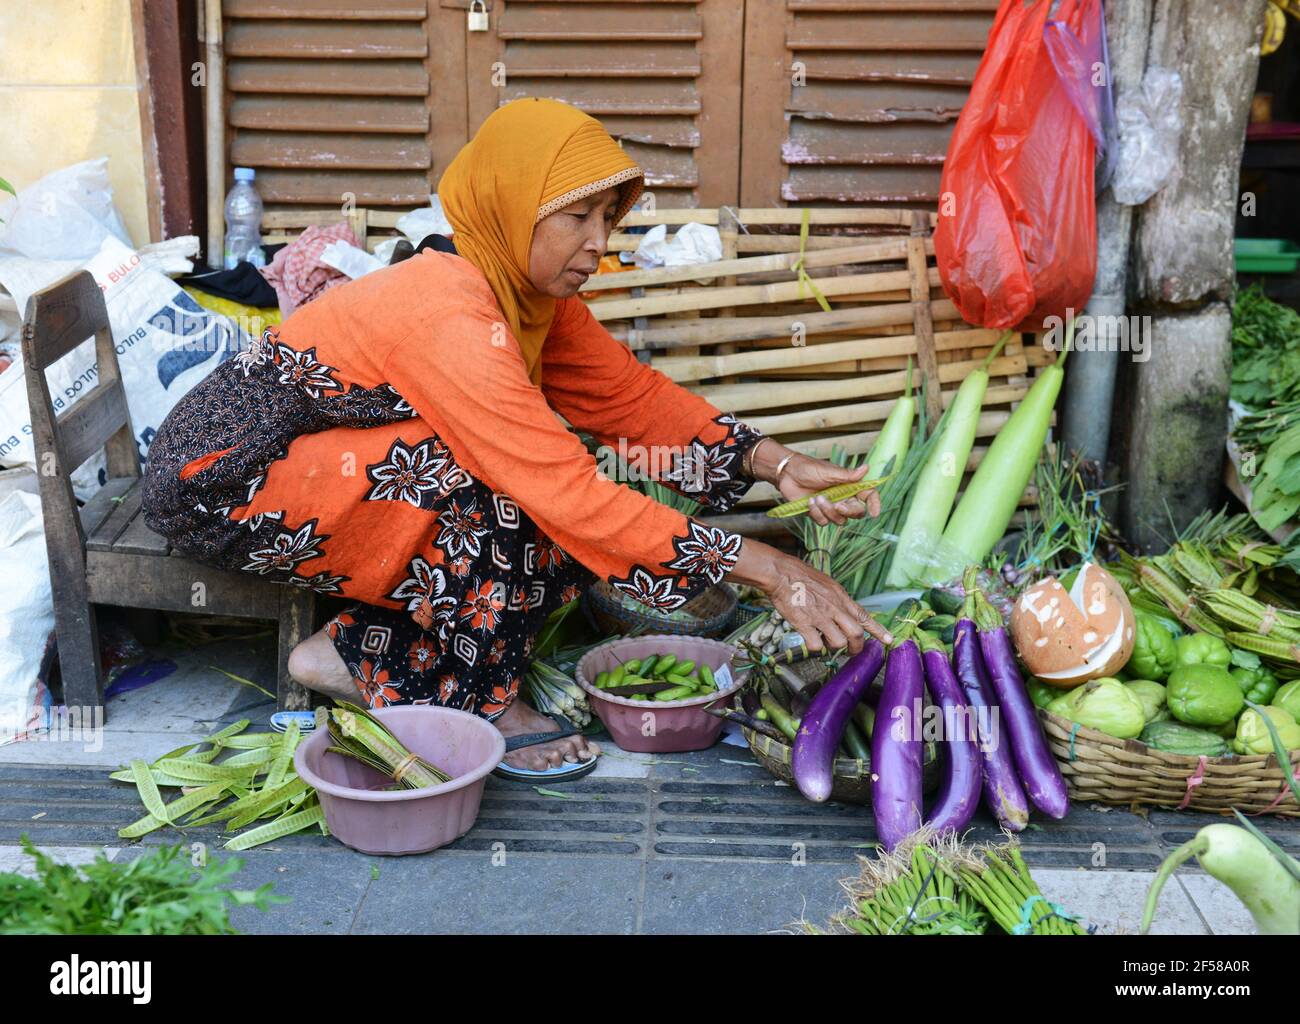 The vibrant and colorful market in Banyuwangi, East Java, Indonesia. Stock Photo